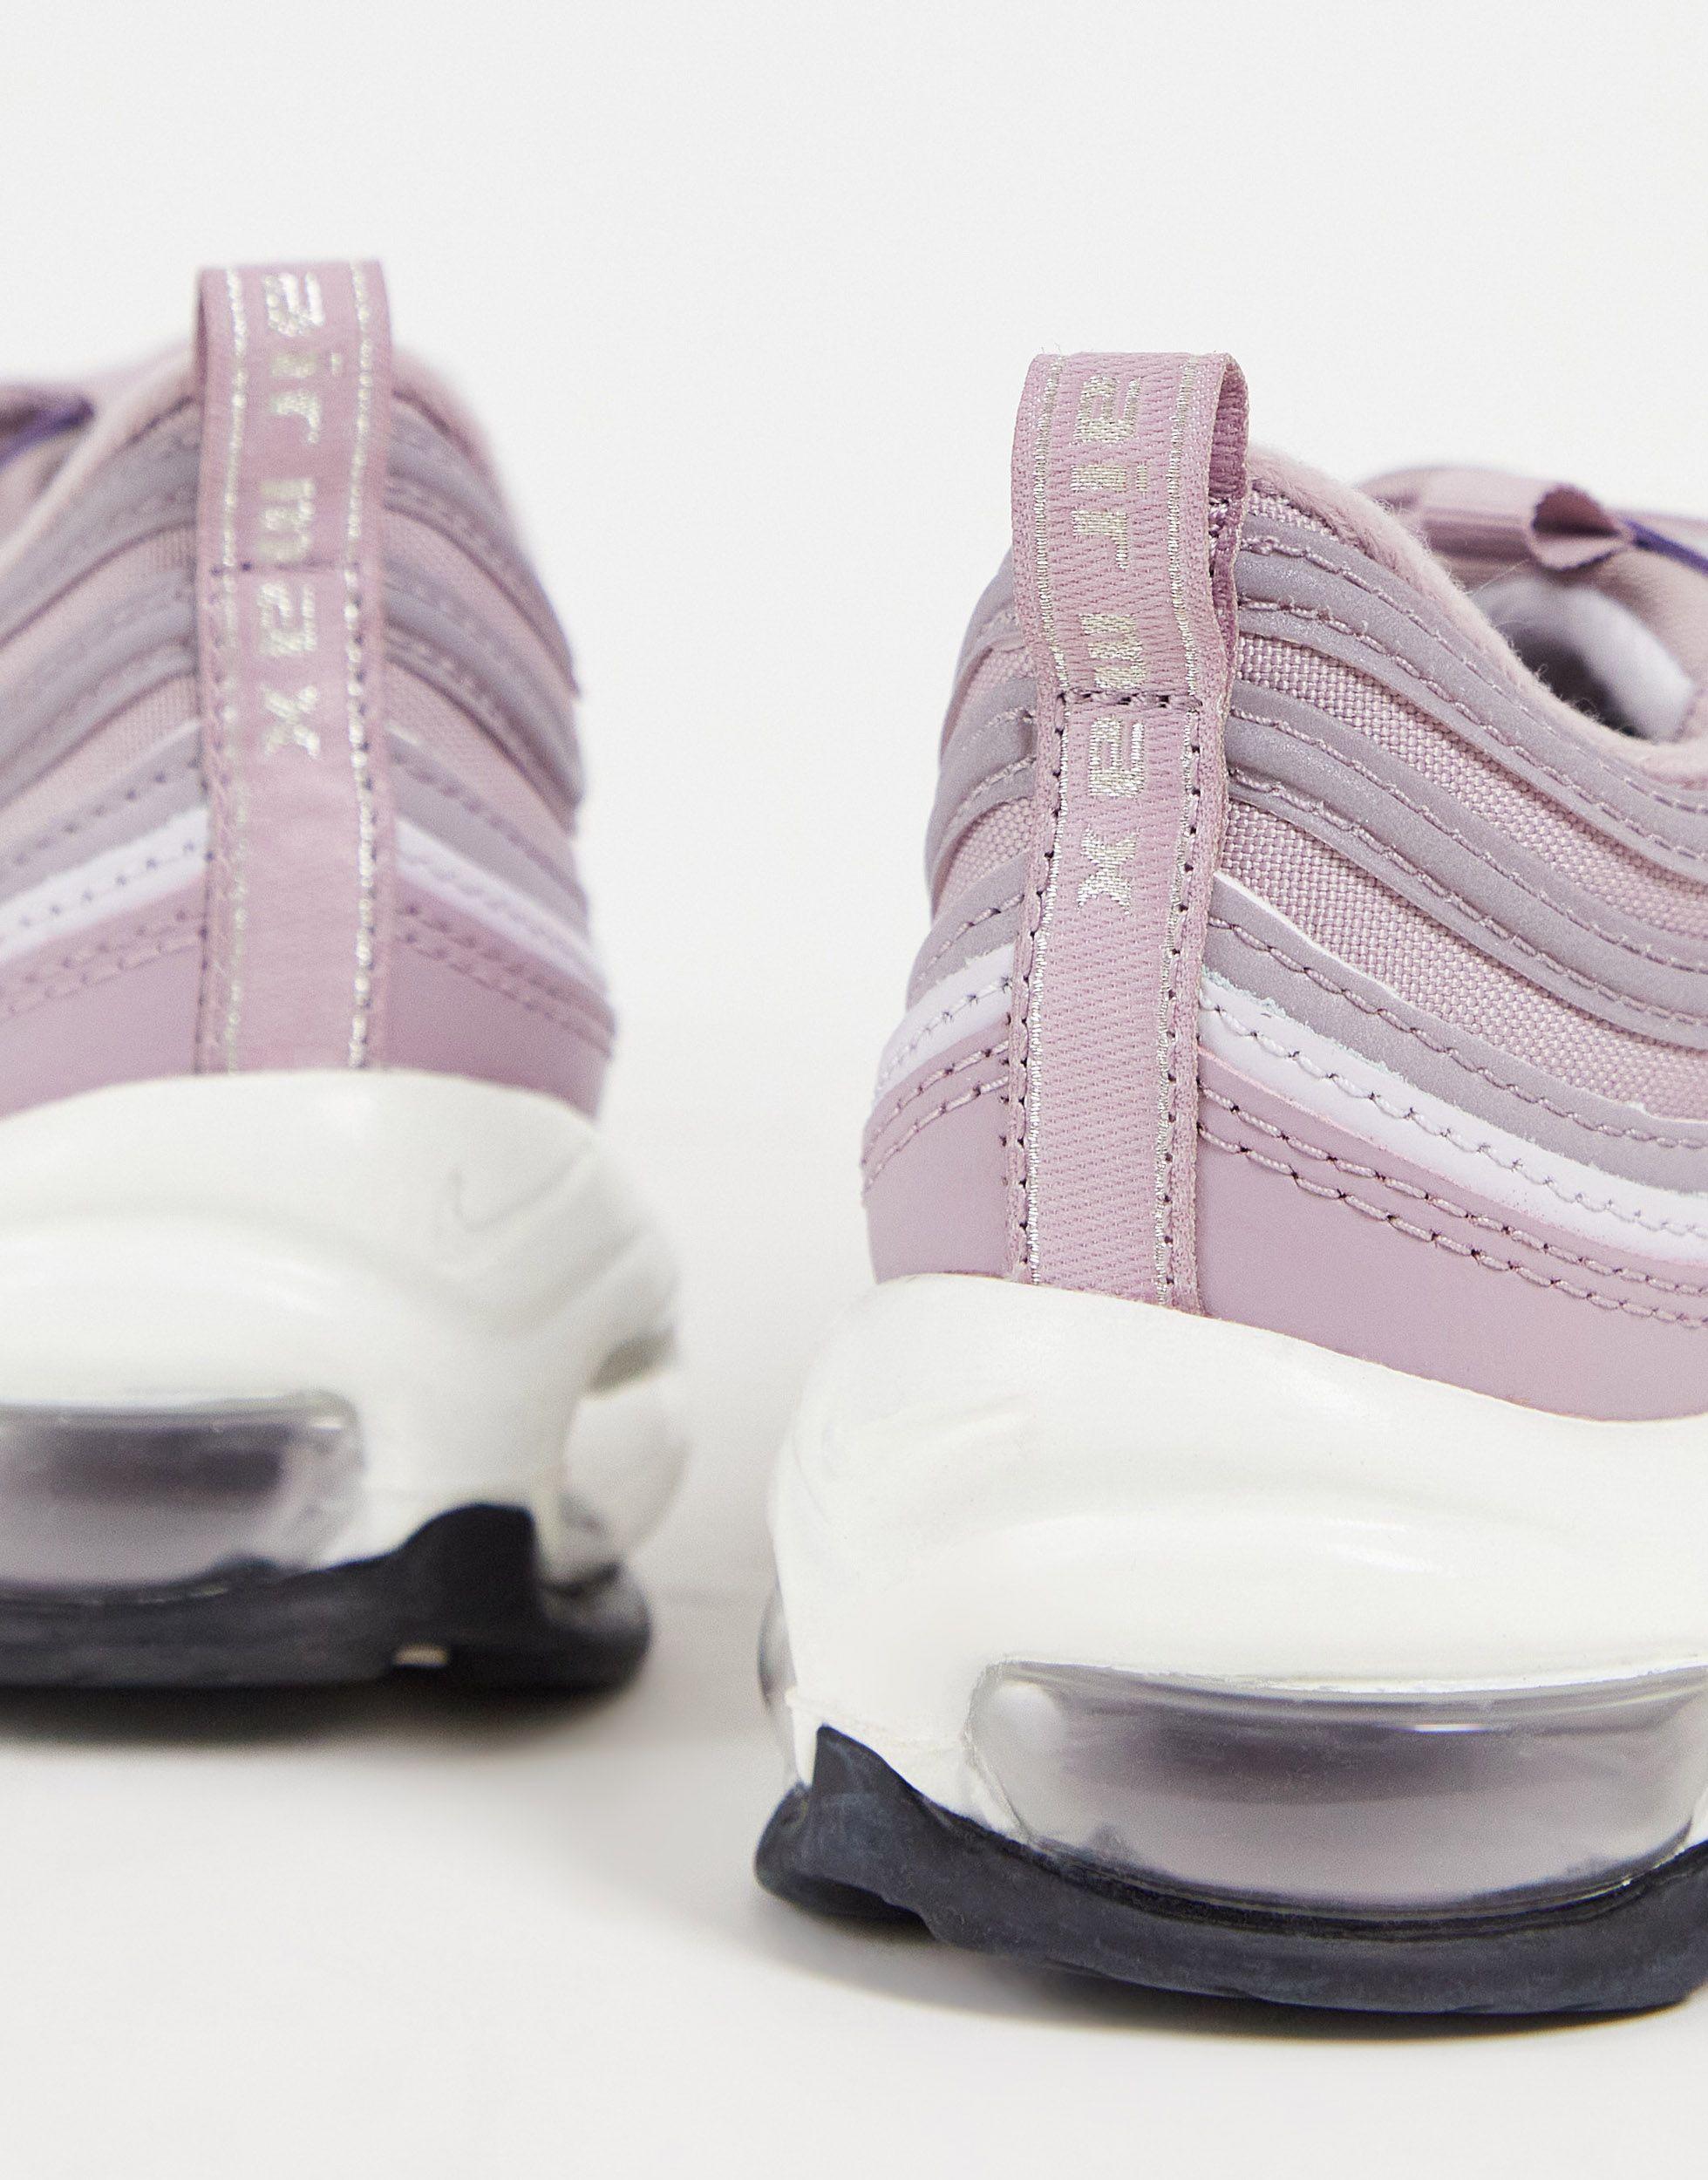 Nike Rubber Air Max 97 Sneakers in Purple | Lyst